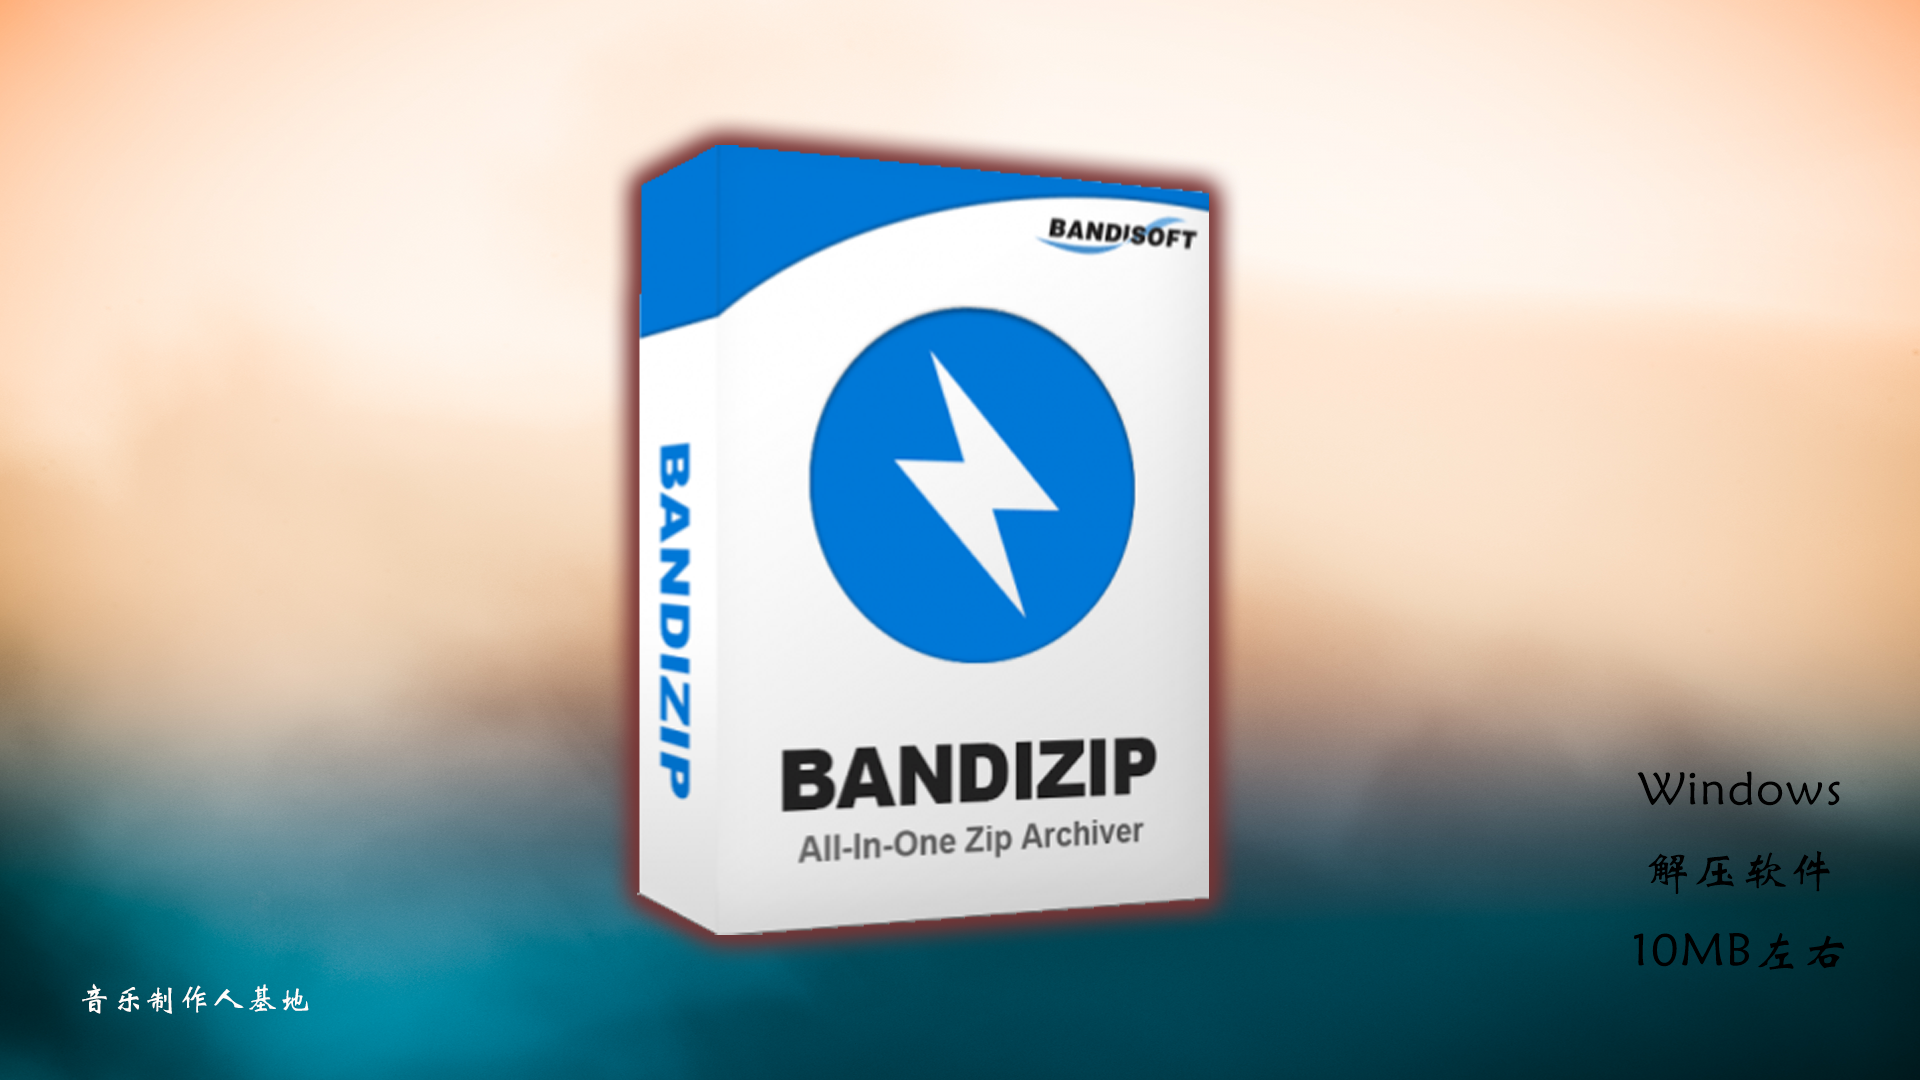 download the new for windows Bandizip Pro 7.32